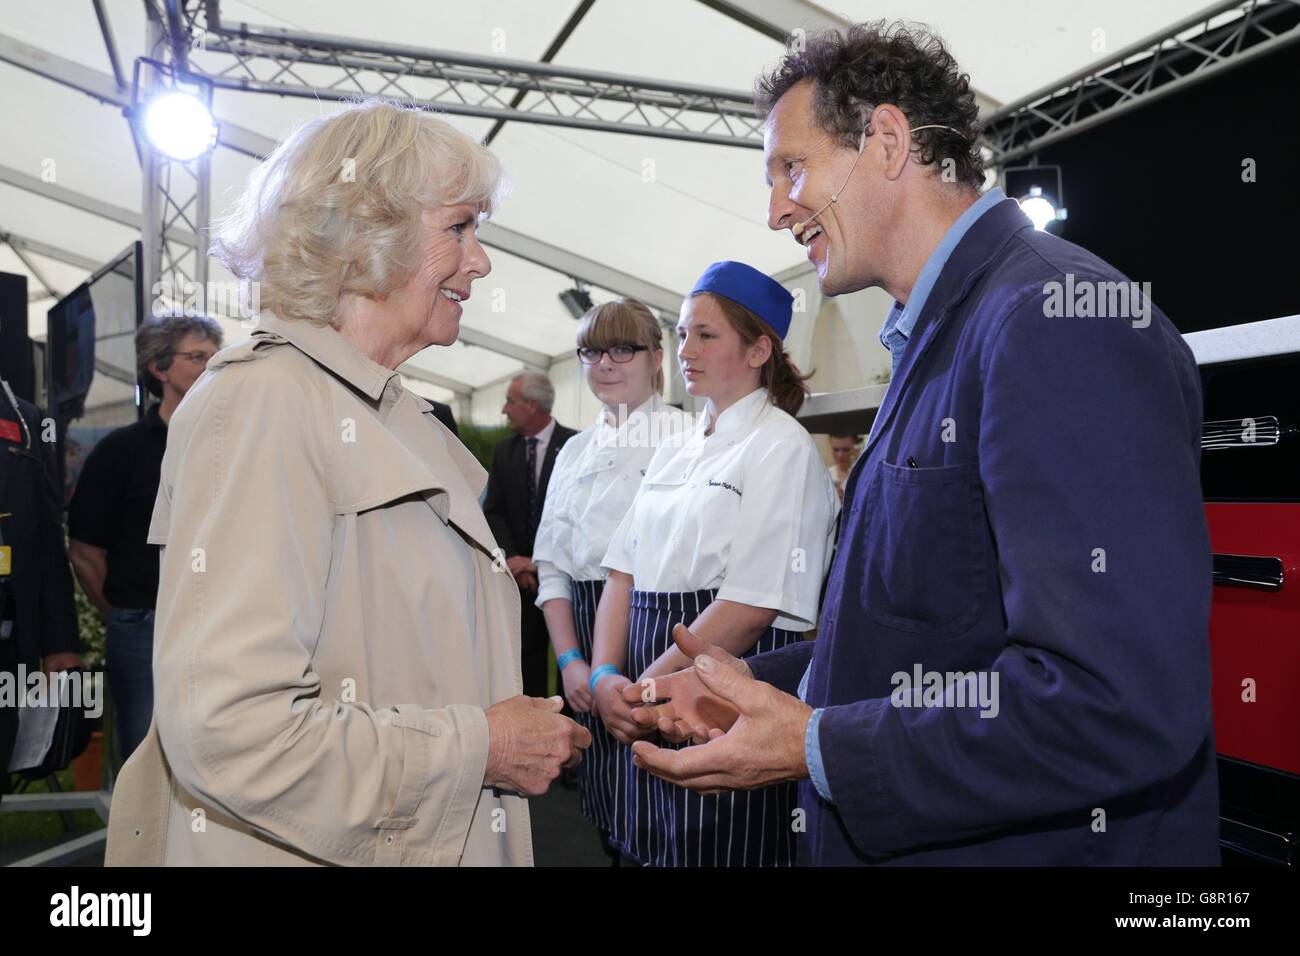 The Duchess of Cornwall meets celebrity gardener Monty Don at the 154th Royal Norfolk Show in Norwich, Norfolk. Stock Photo